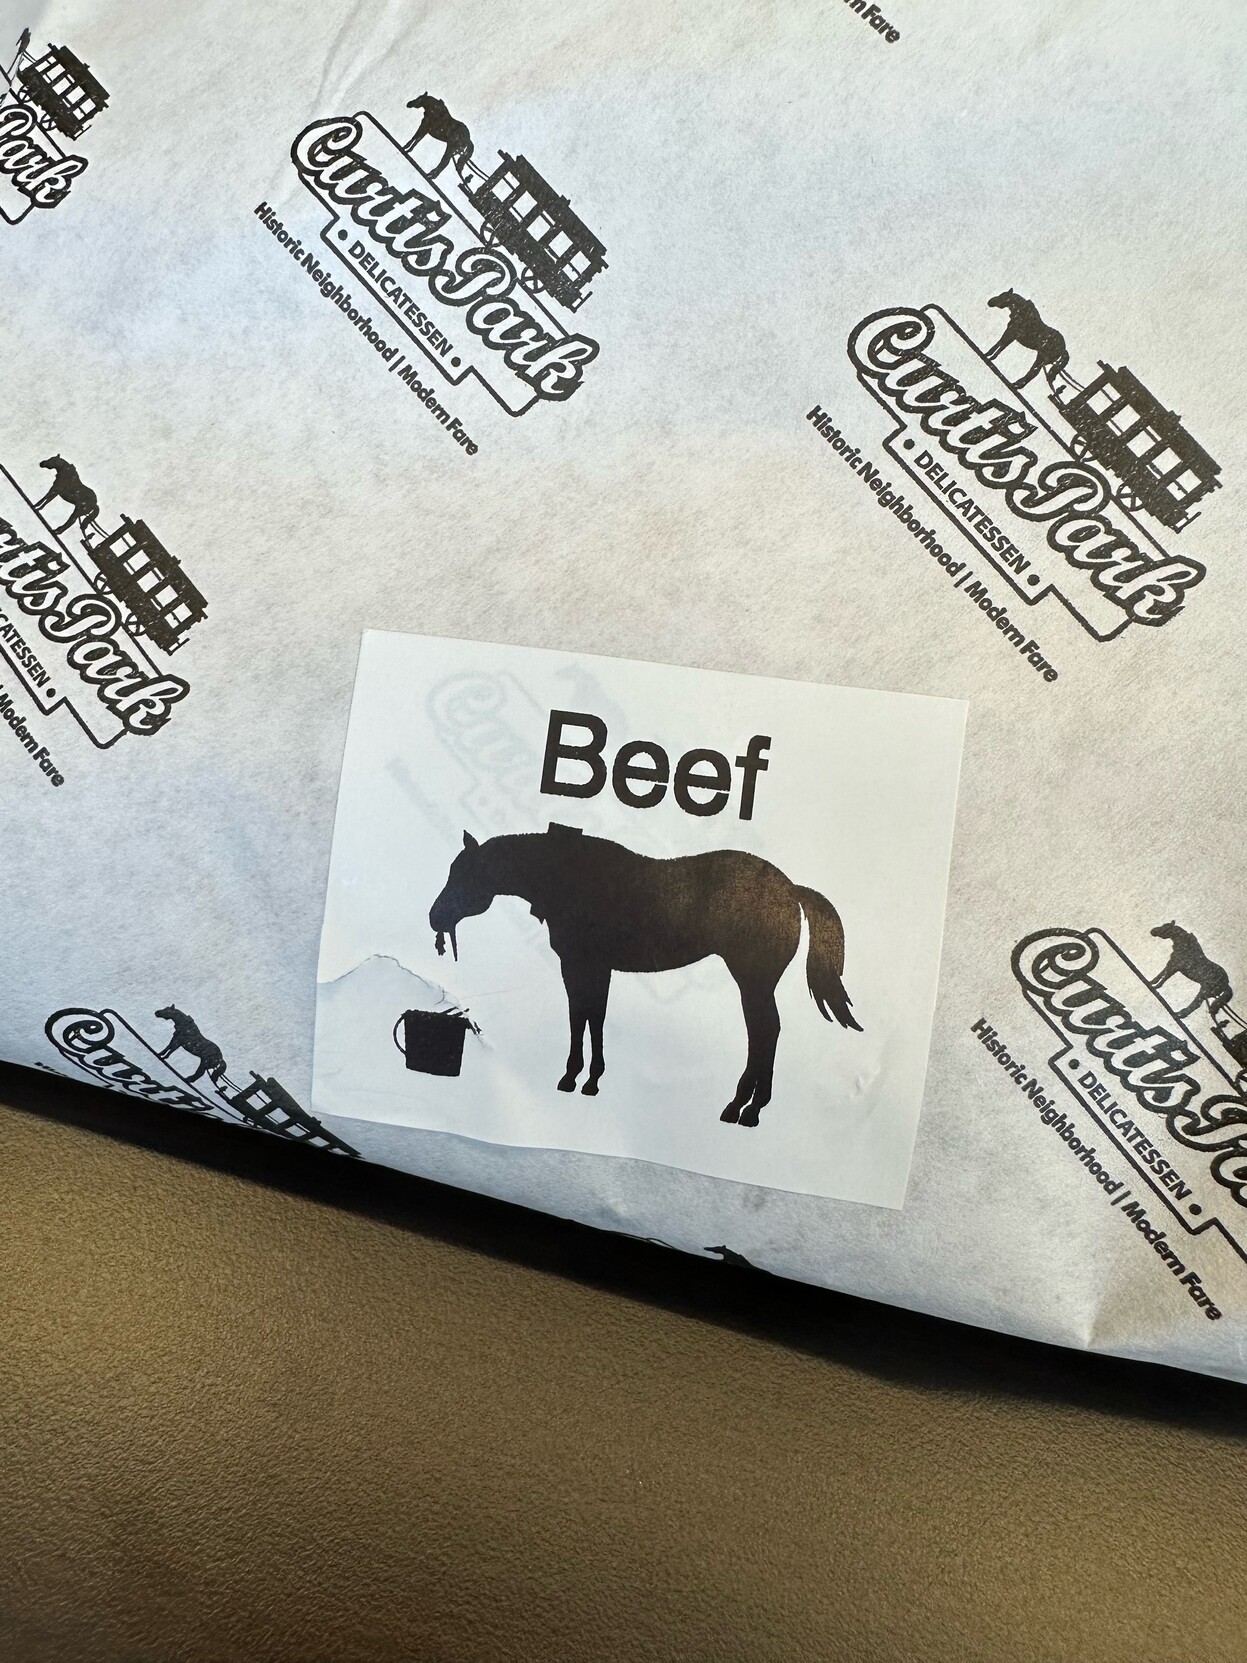 Sandwich wrapping with a label saying “beef” above a drawing of a horse.